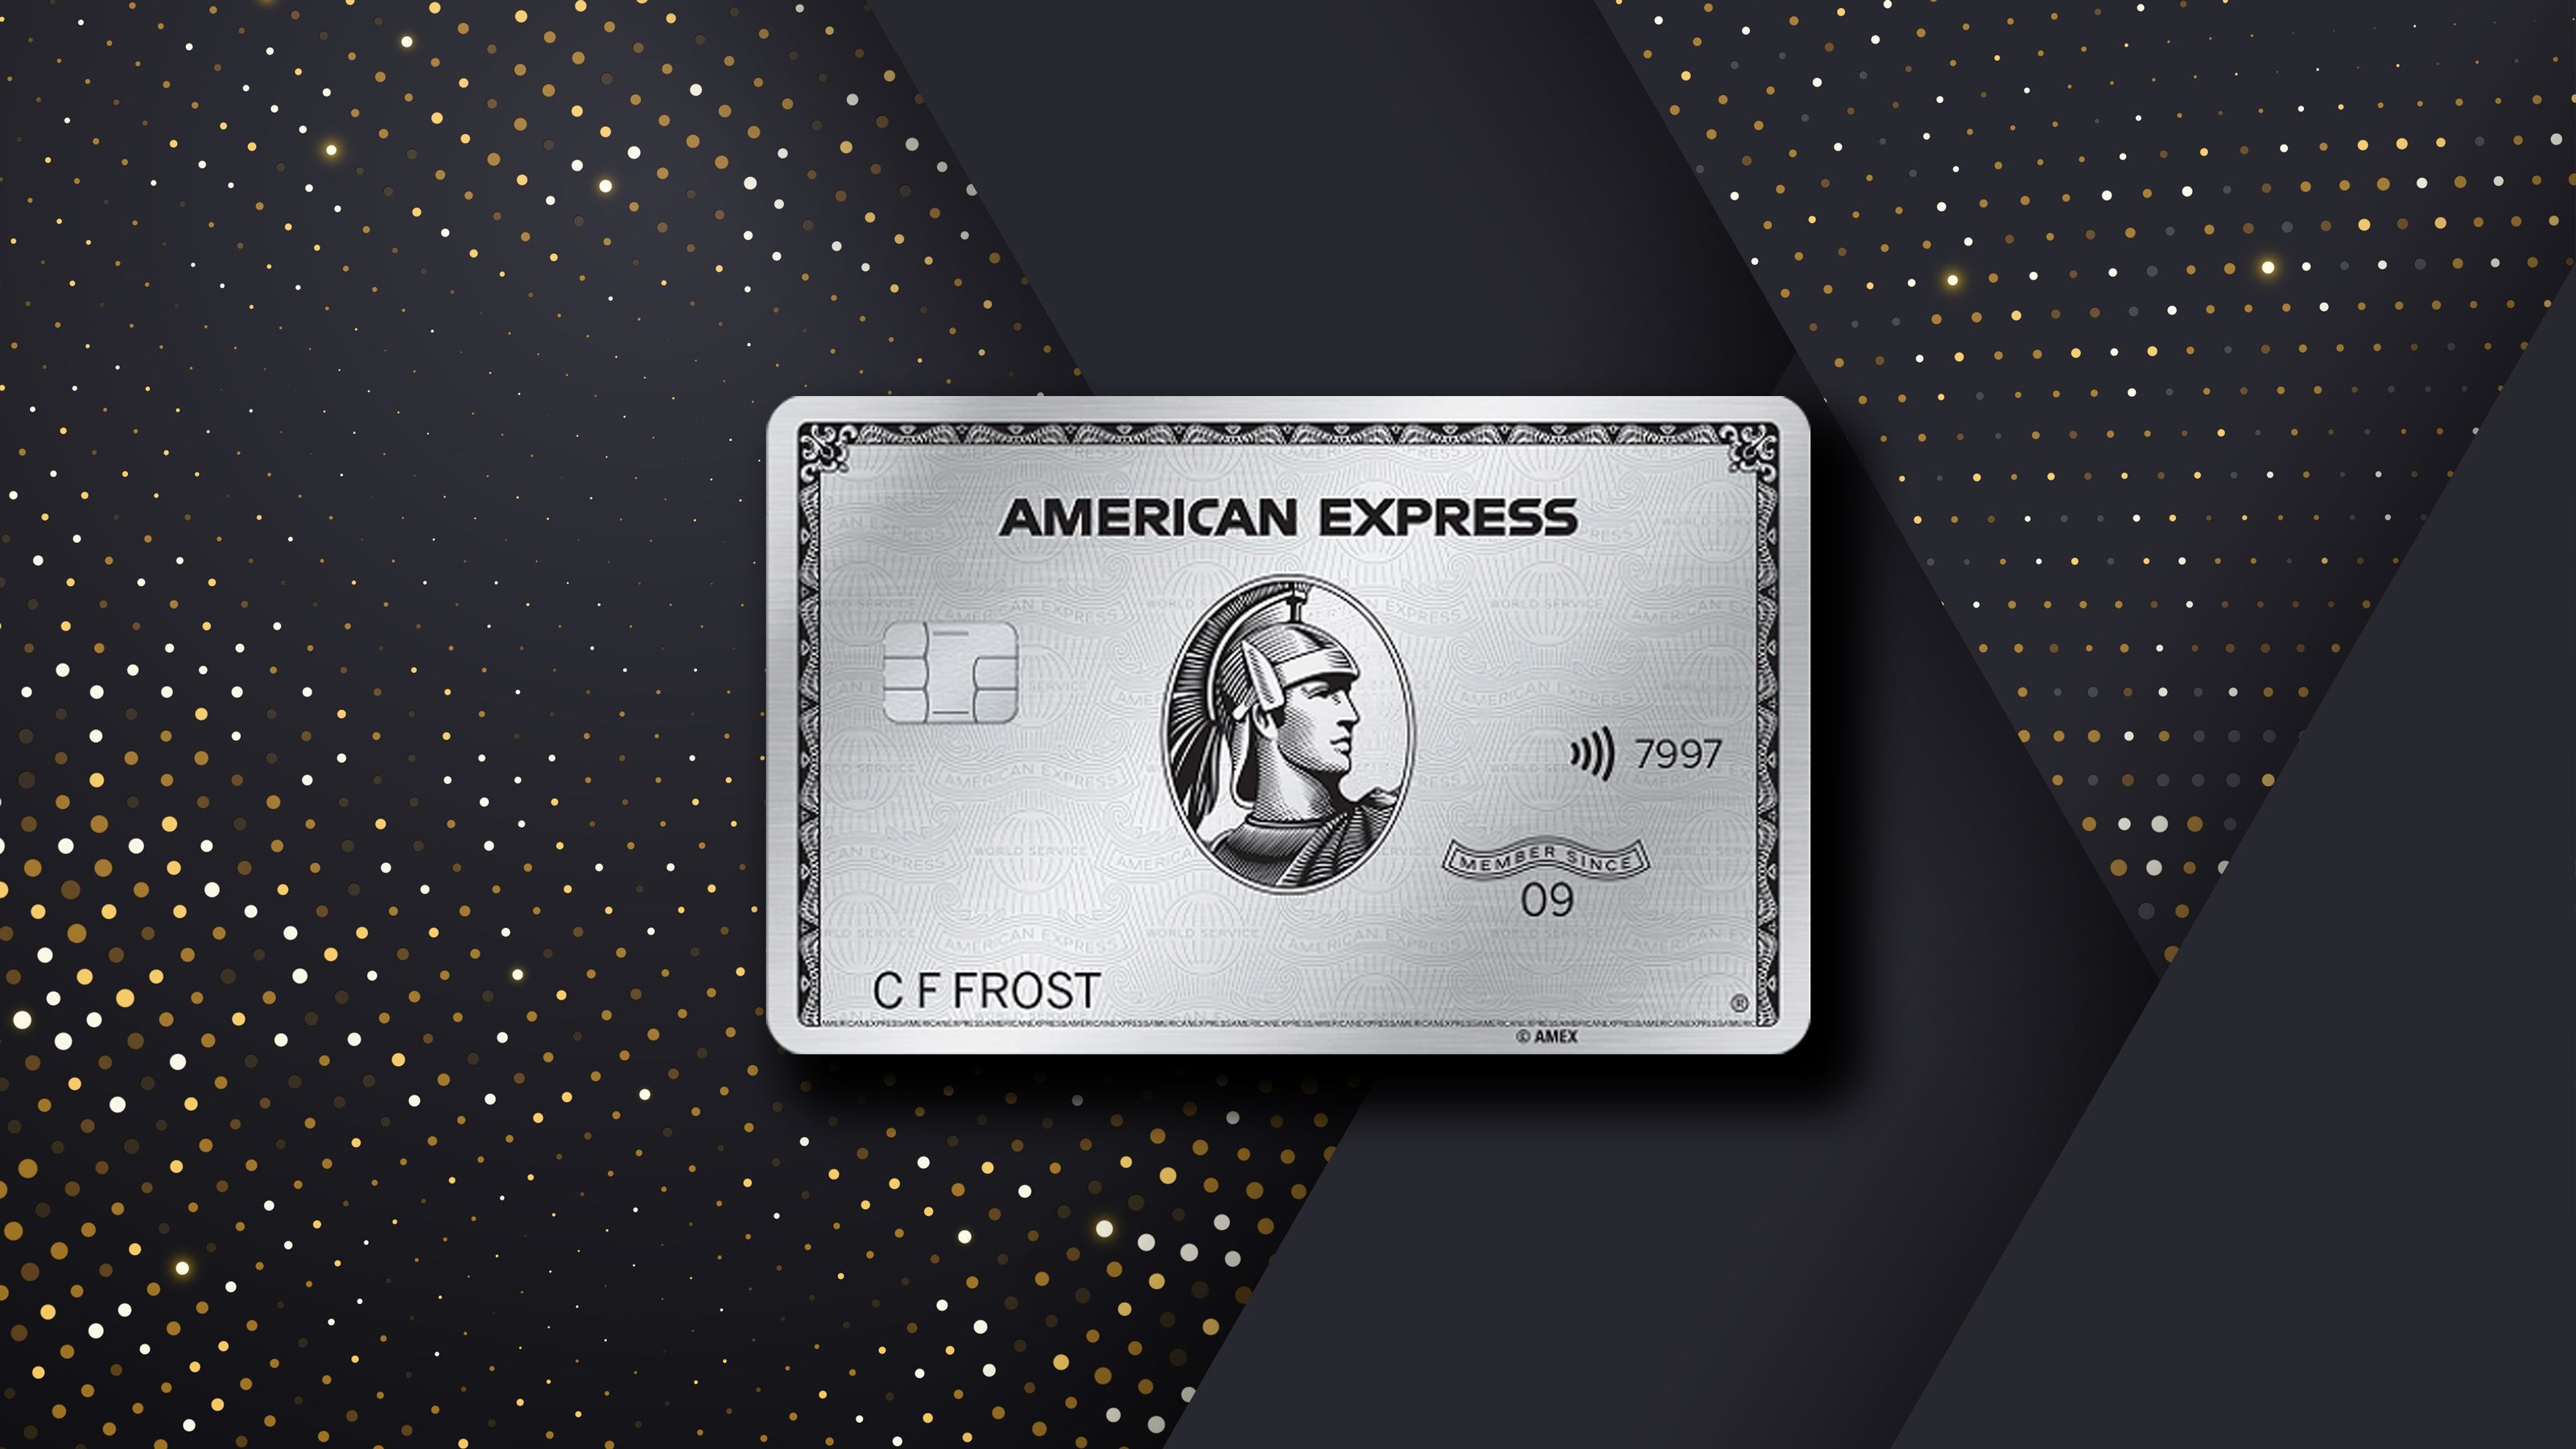 American Express Platinum card review: Luxury travel perks